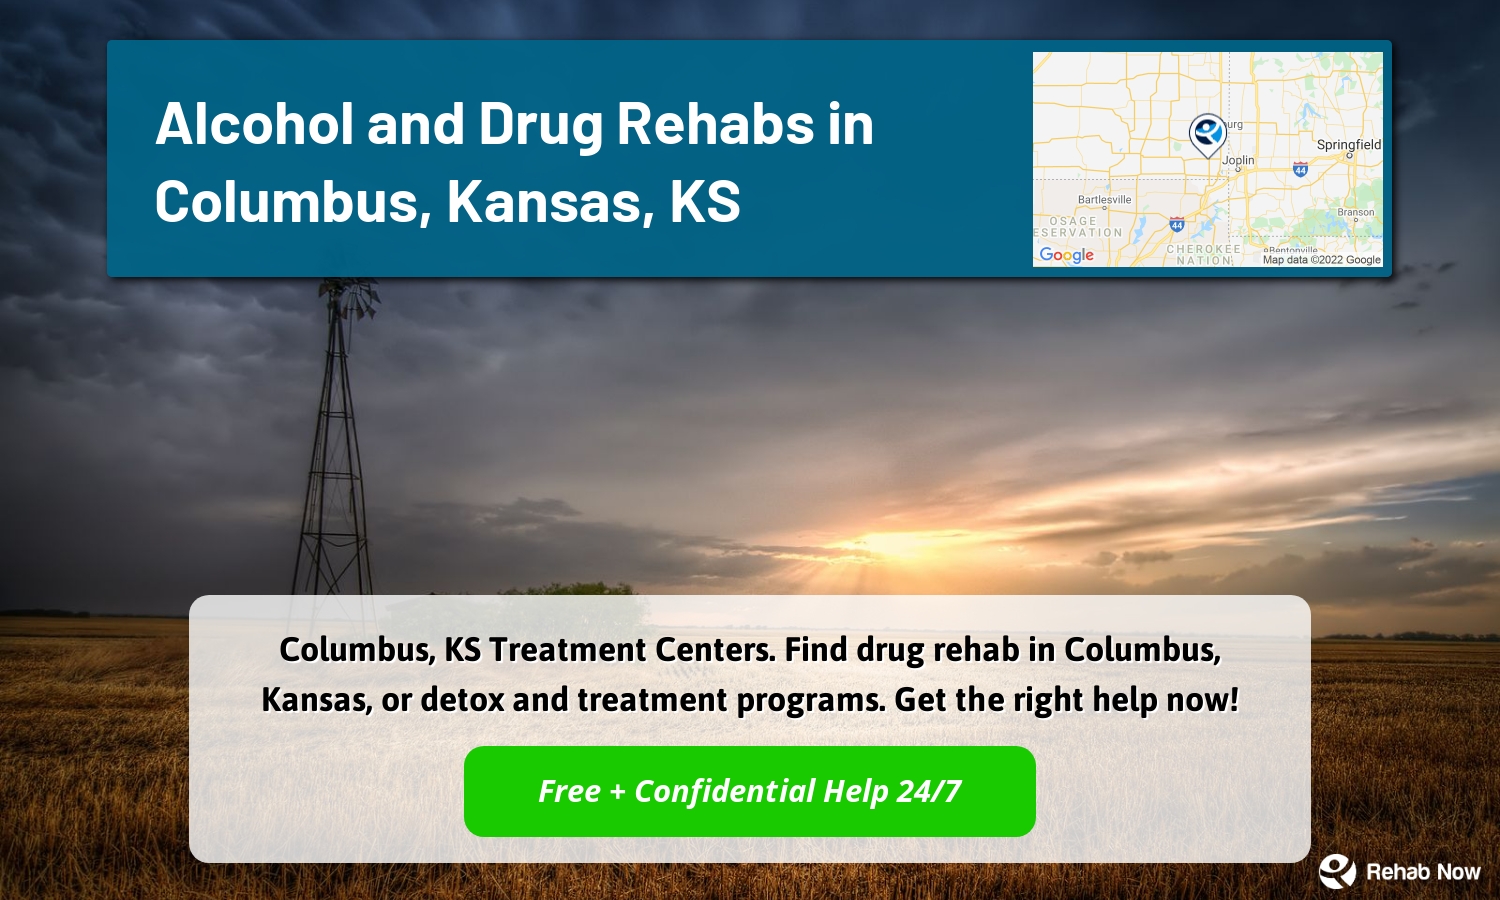 Columbus, KS Treatment Centers. Find drug rehab in Columbus, Kansas, or detox and treatment programs. Get the right help now!